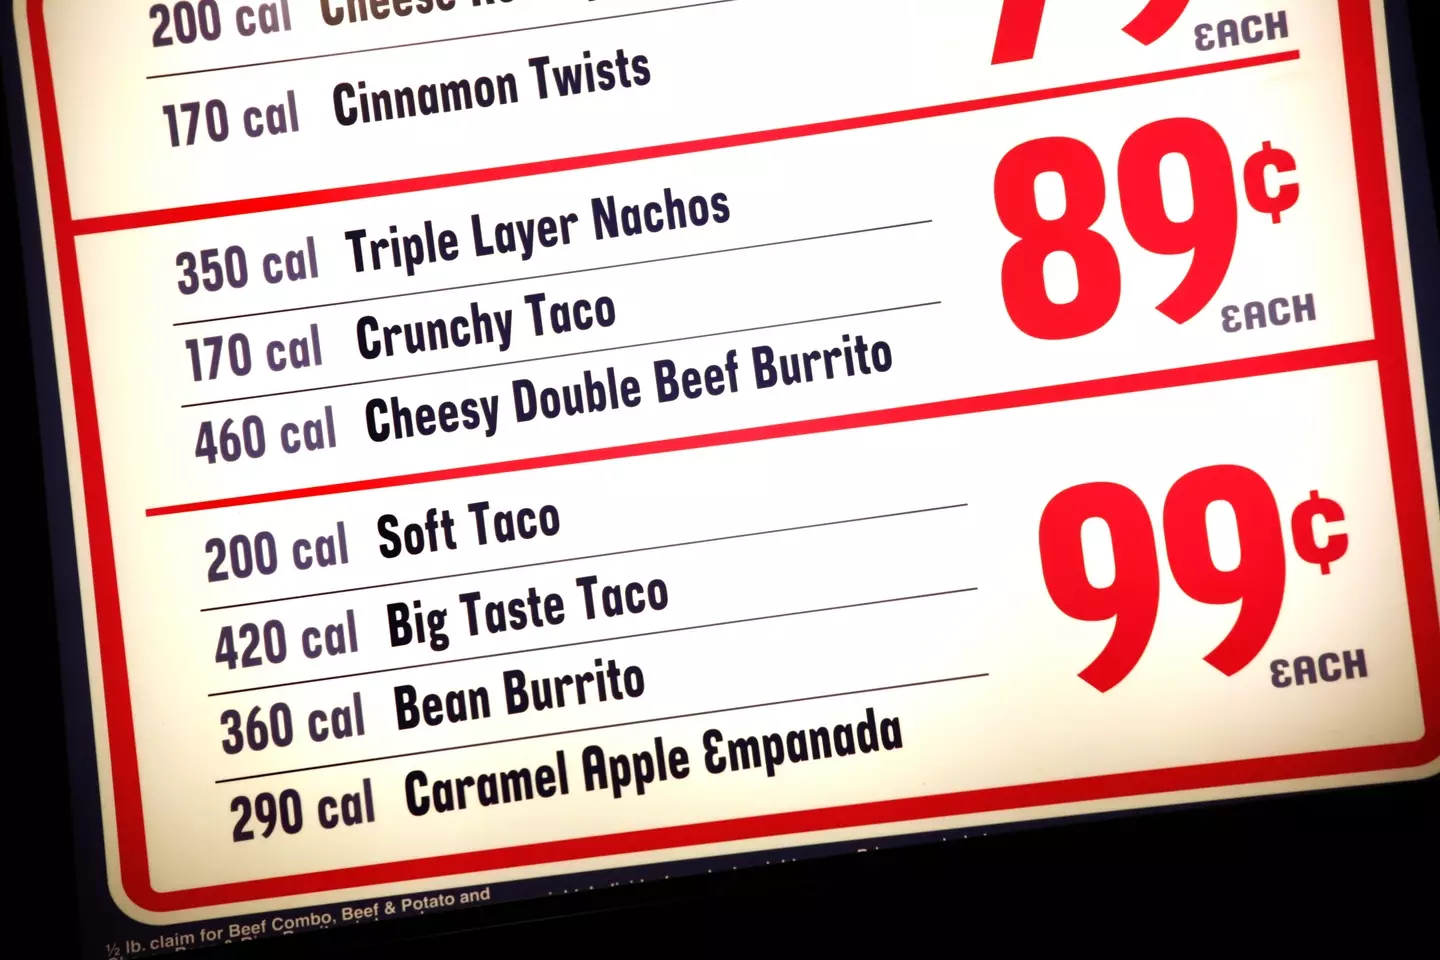 Taco Bell released it's 'Why Pay More?' campaign in 2008. (Carolyn Cole/Los Angeles Times via Getty Images)